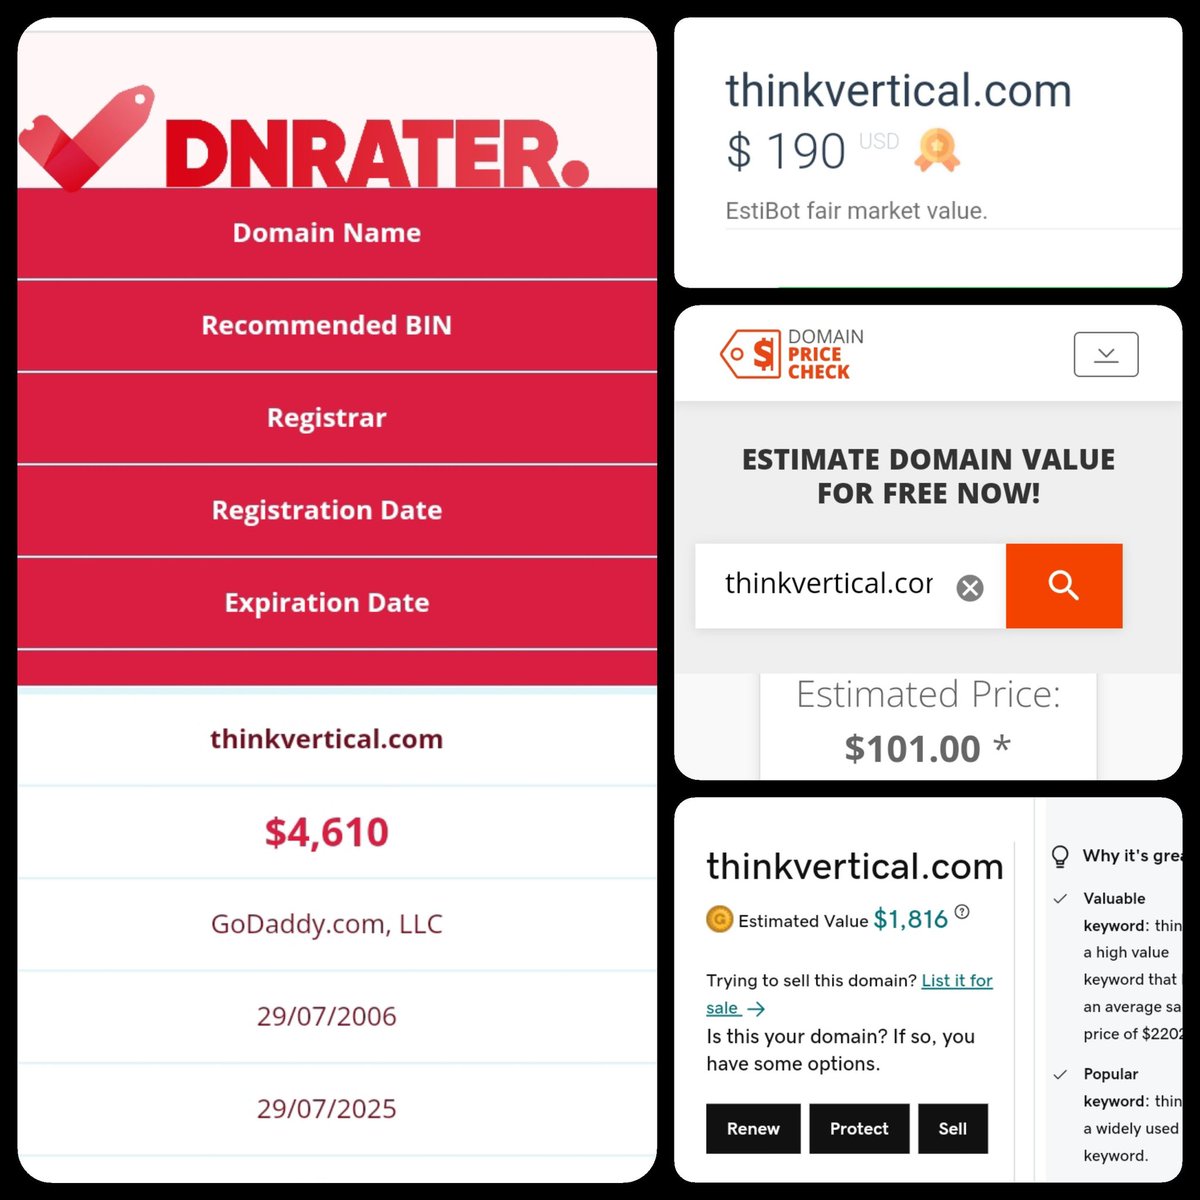 🌐 ThinkVertical .com

💰Sold Price : $4,688
✔ @dnrater Recommended BIN : $4,610 😎
✔Godaddy Estimation : $1,816
✔Estibot Valuation : $190
✔Pc domains Appraisal : $101

📌Venue : @BuyDomains